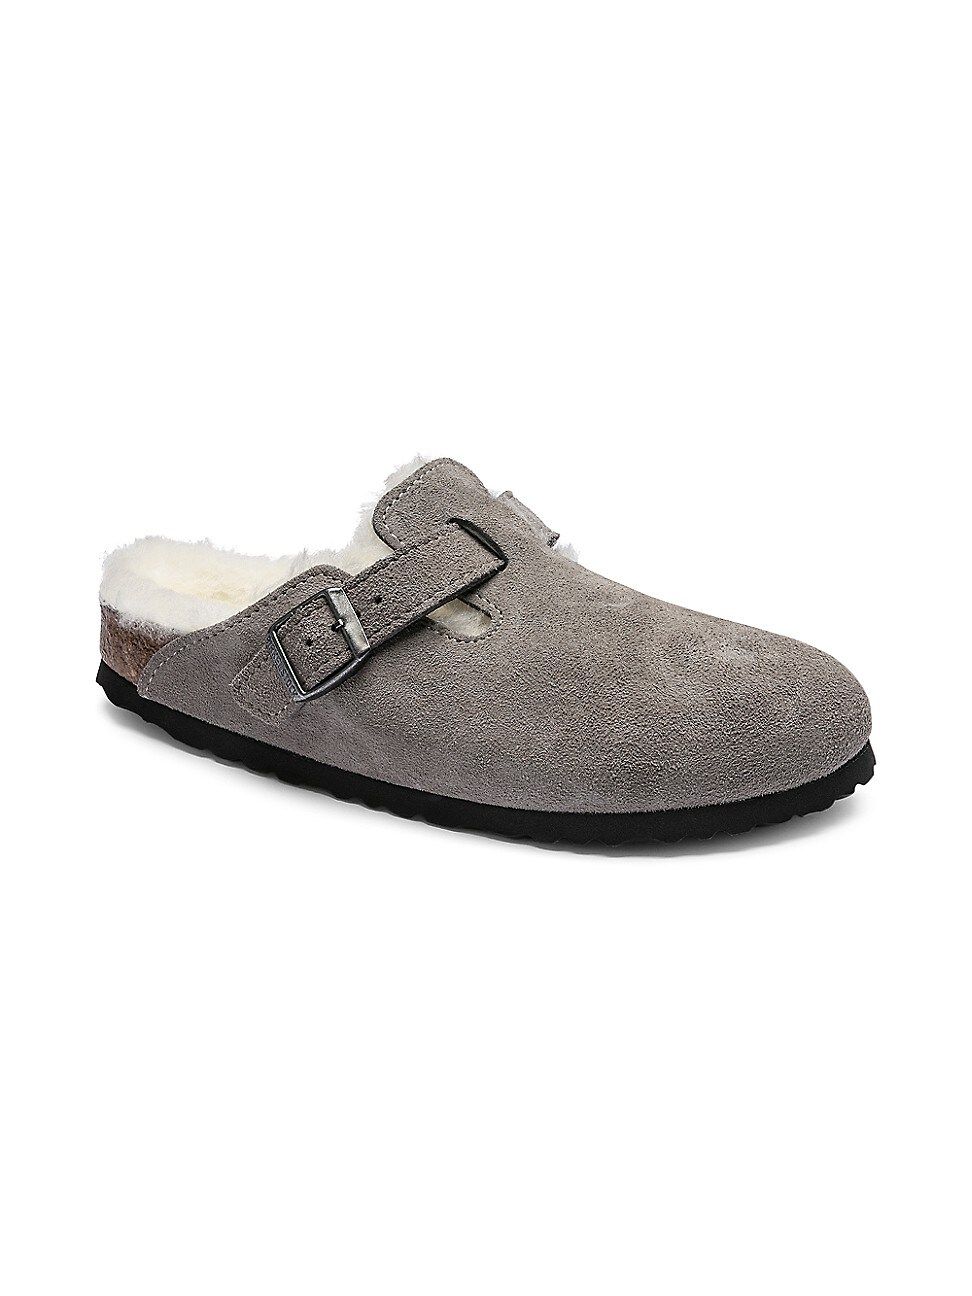 Women's Boston Shearling-Lined Suede Clogs - Stone Coin - Size 6 | Saks Fifth Avenue